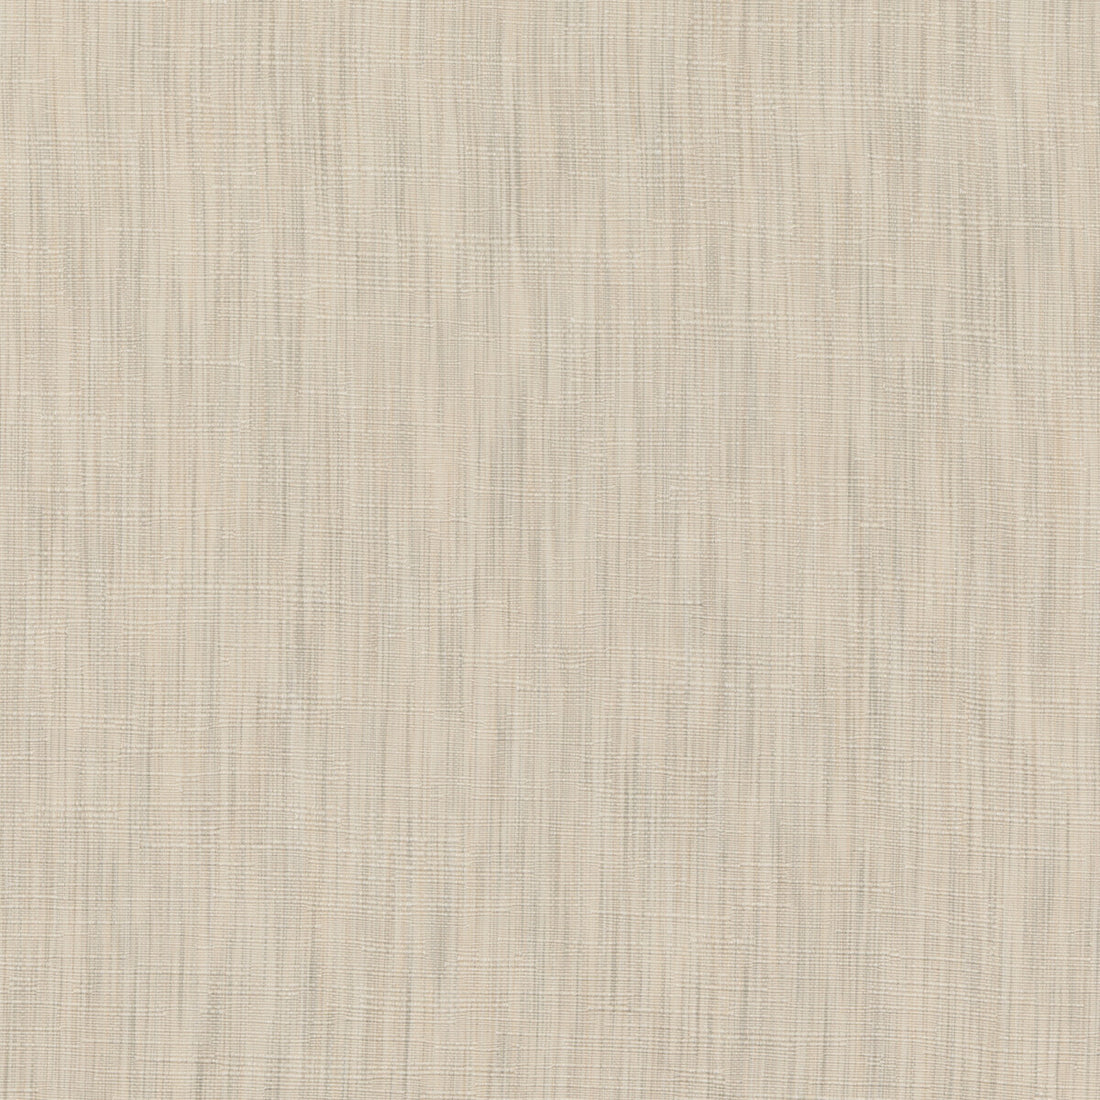 Saverne Texture fabric in ivory color - pattern 8019122.1.0 - by Brunschwig &amp; Fils in the Alsace Weaves collection